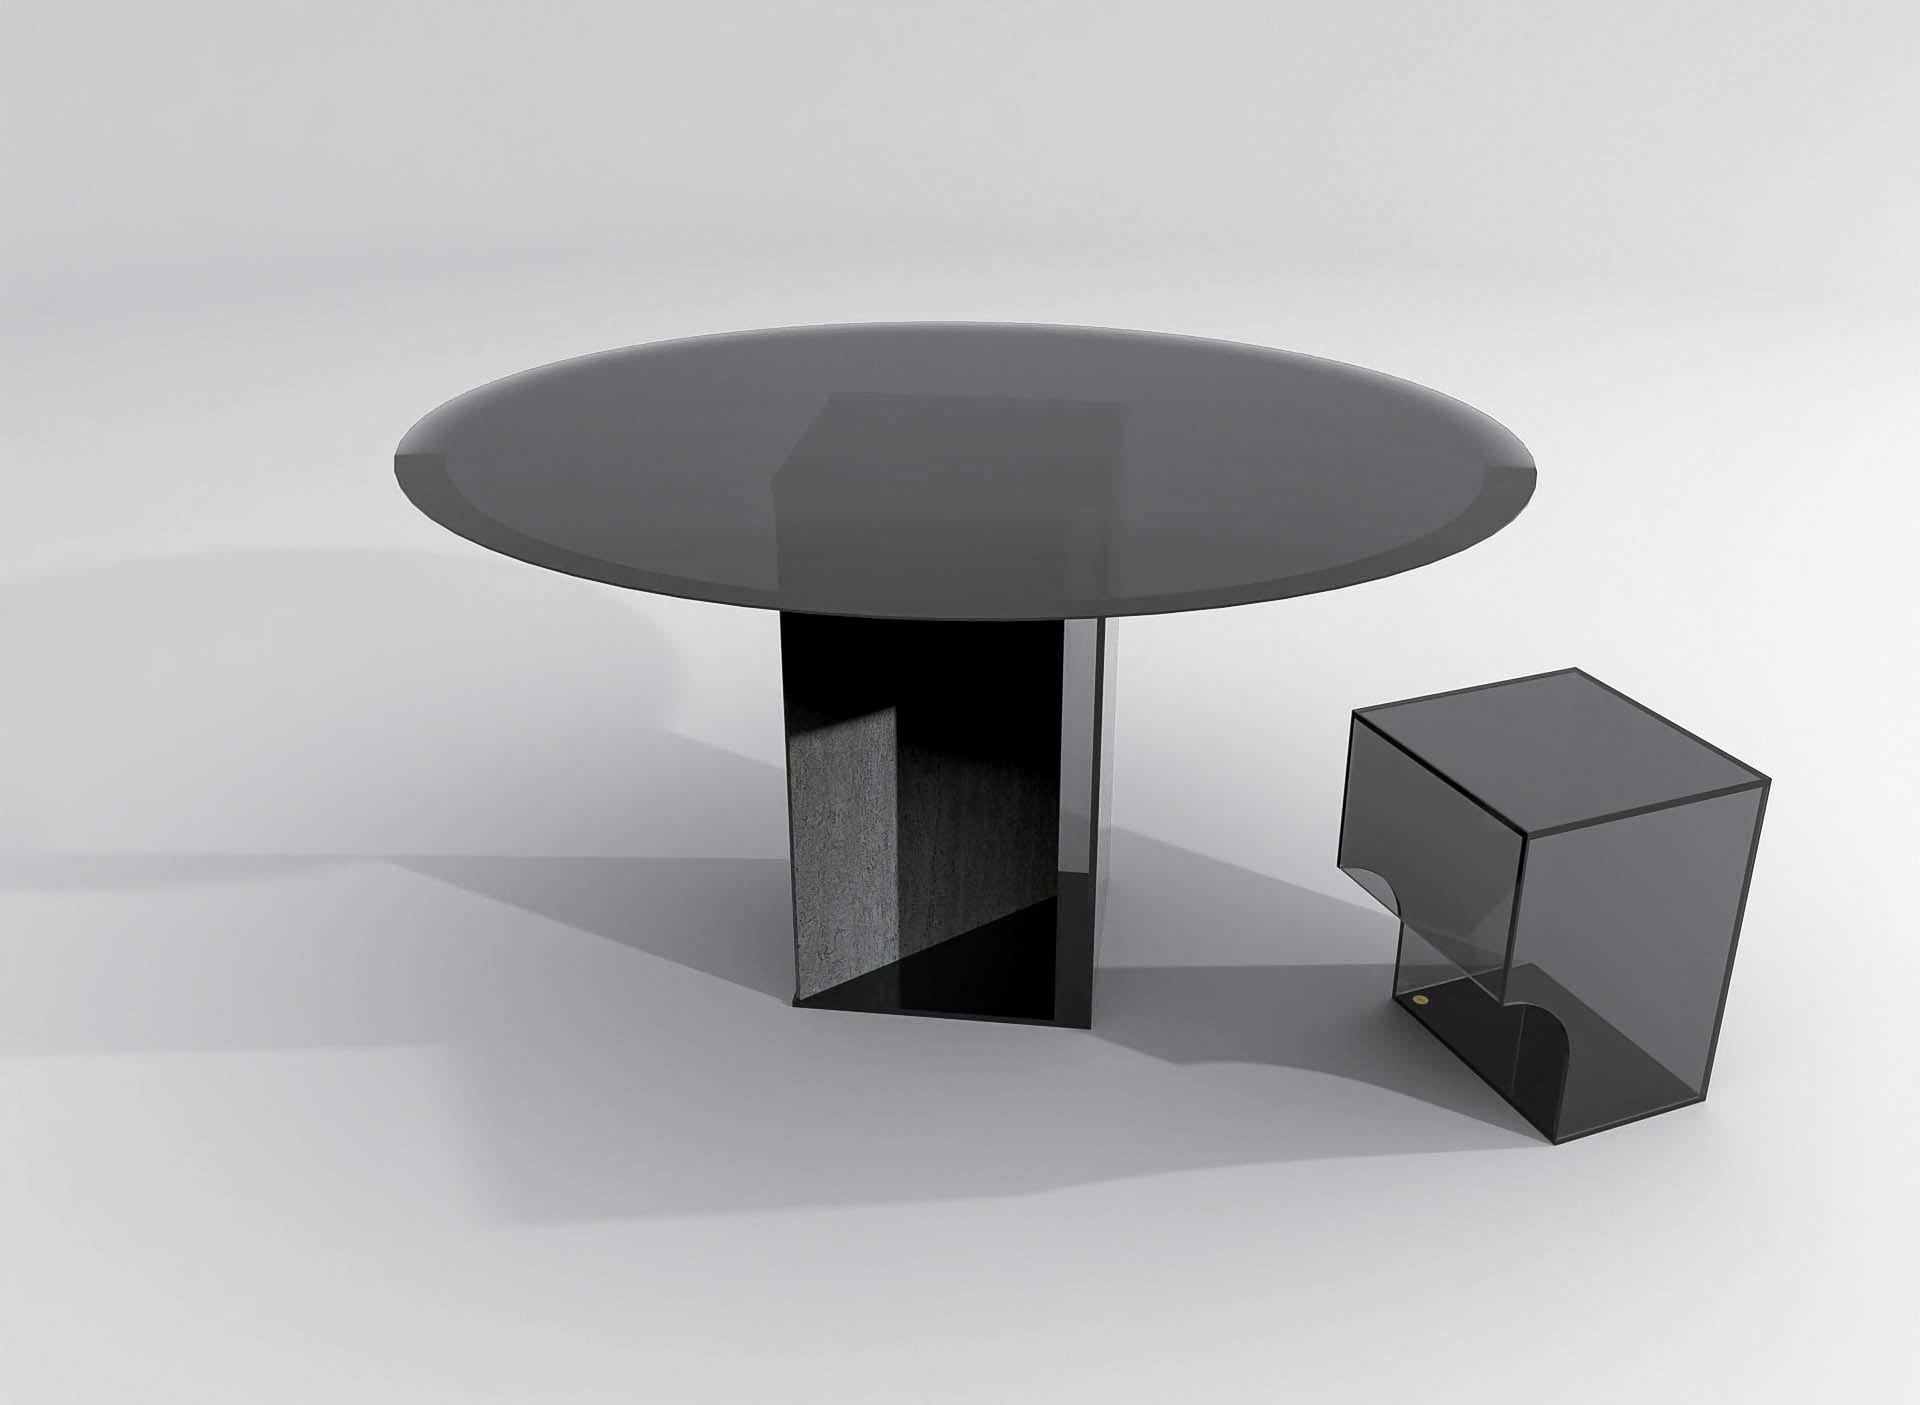 Minimalist Contemporary Round Dining Table in Black Glass and Travertine, Barh Judd Table For Sale